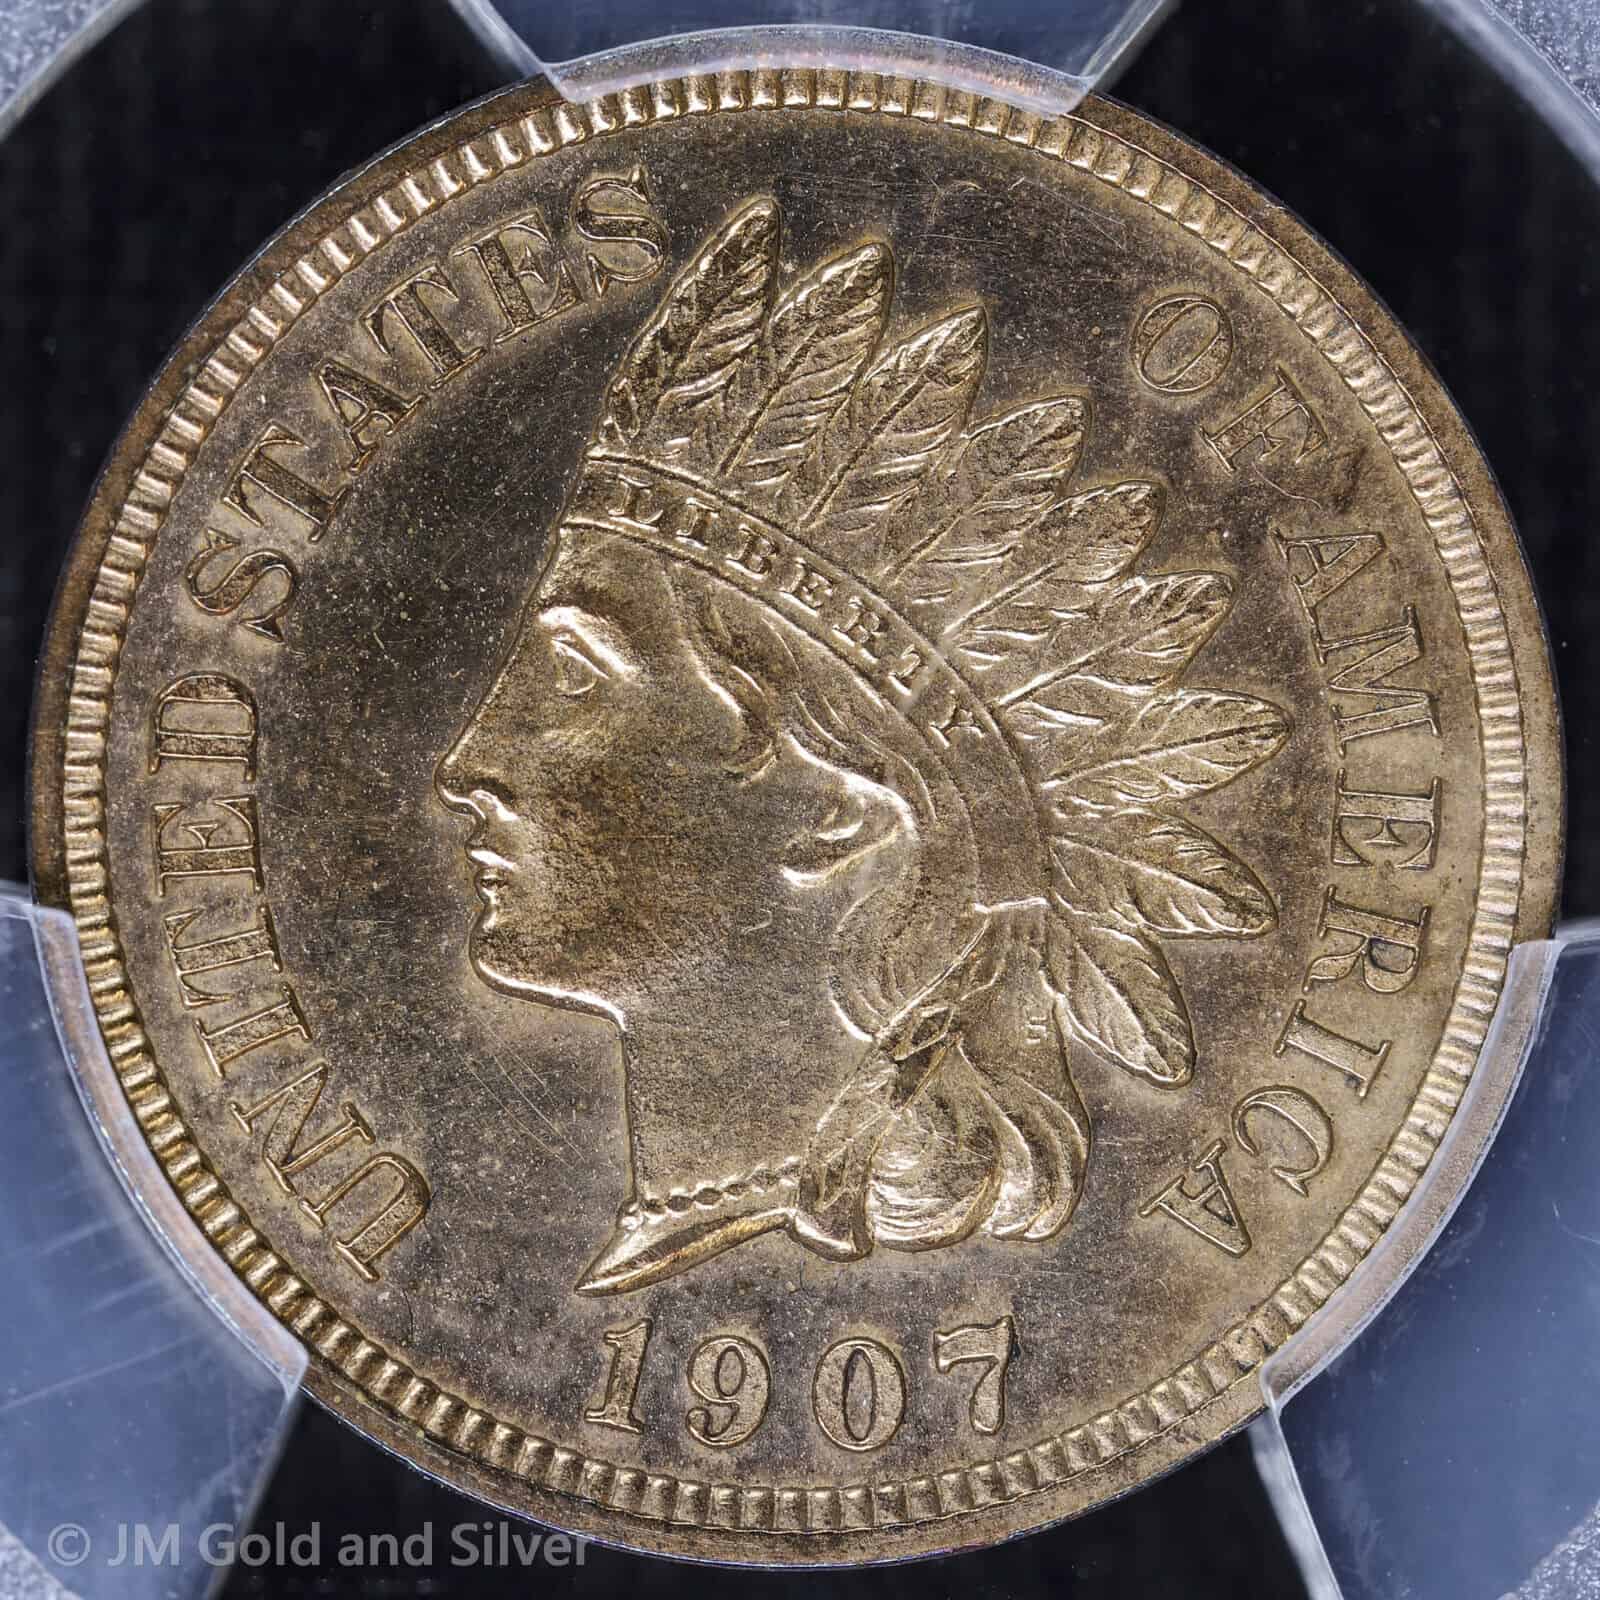 1907 Proof Indian Head Penny